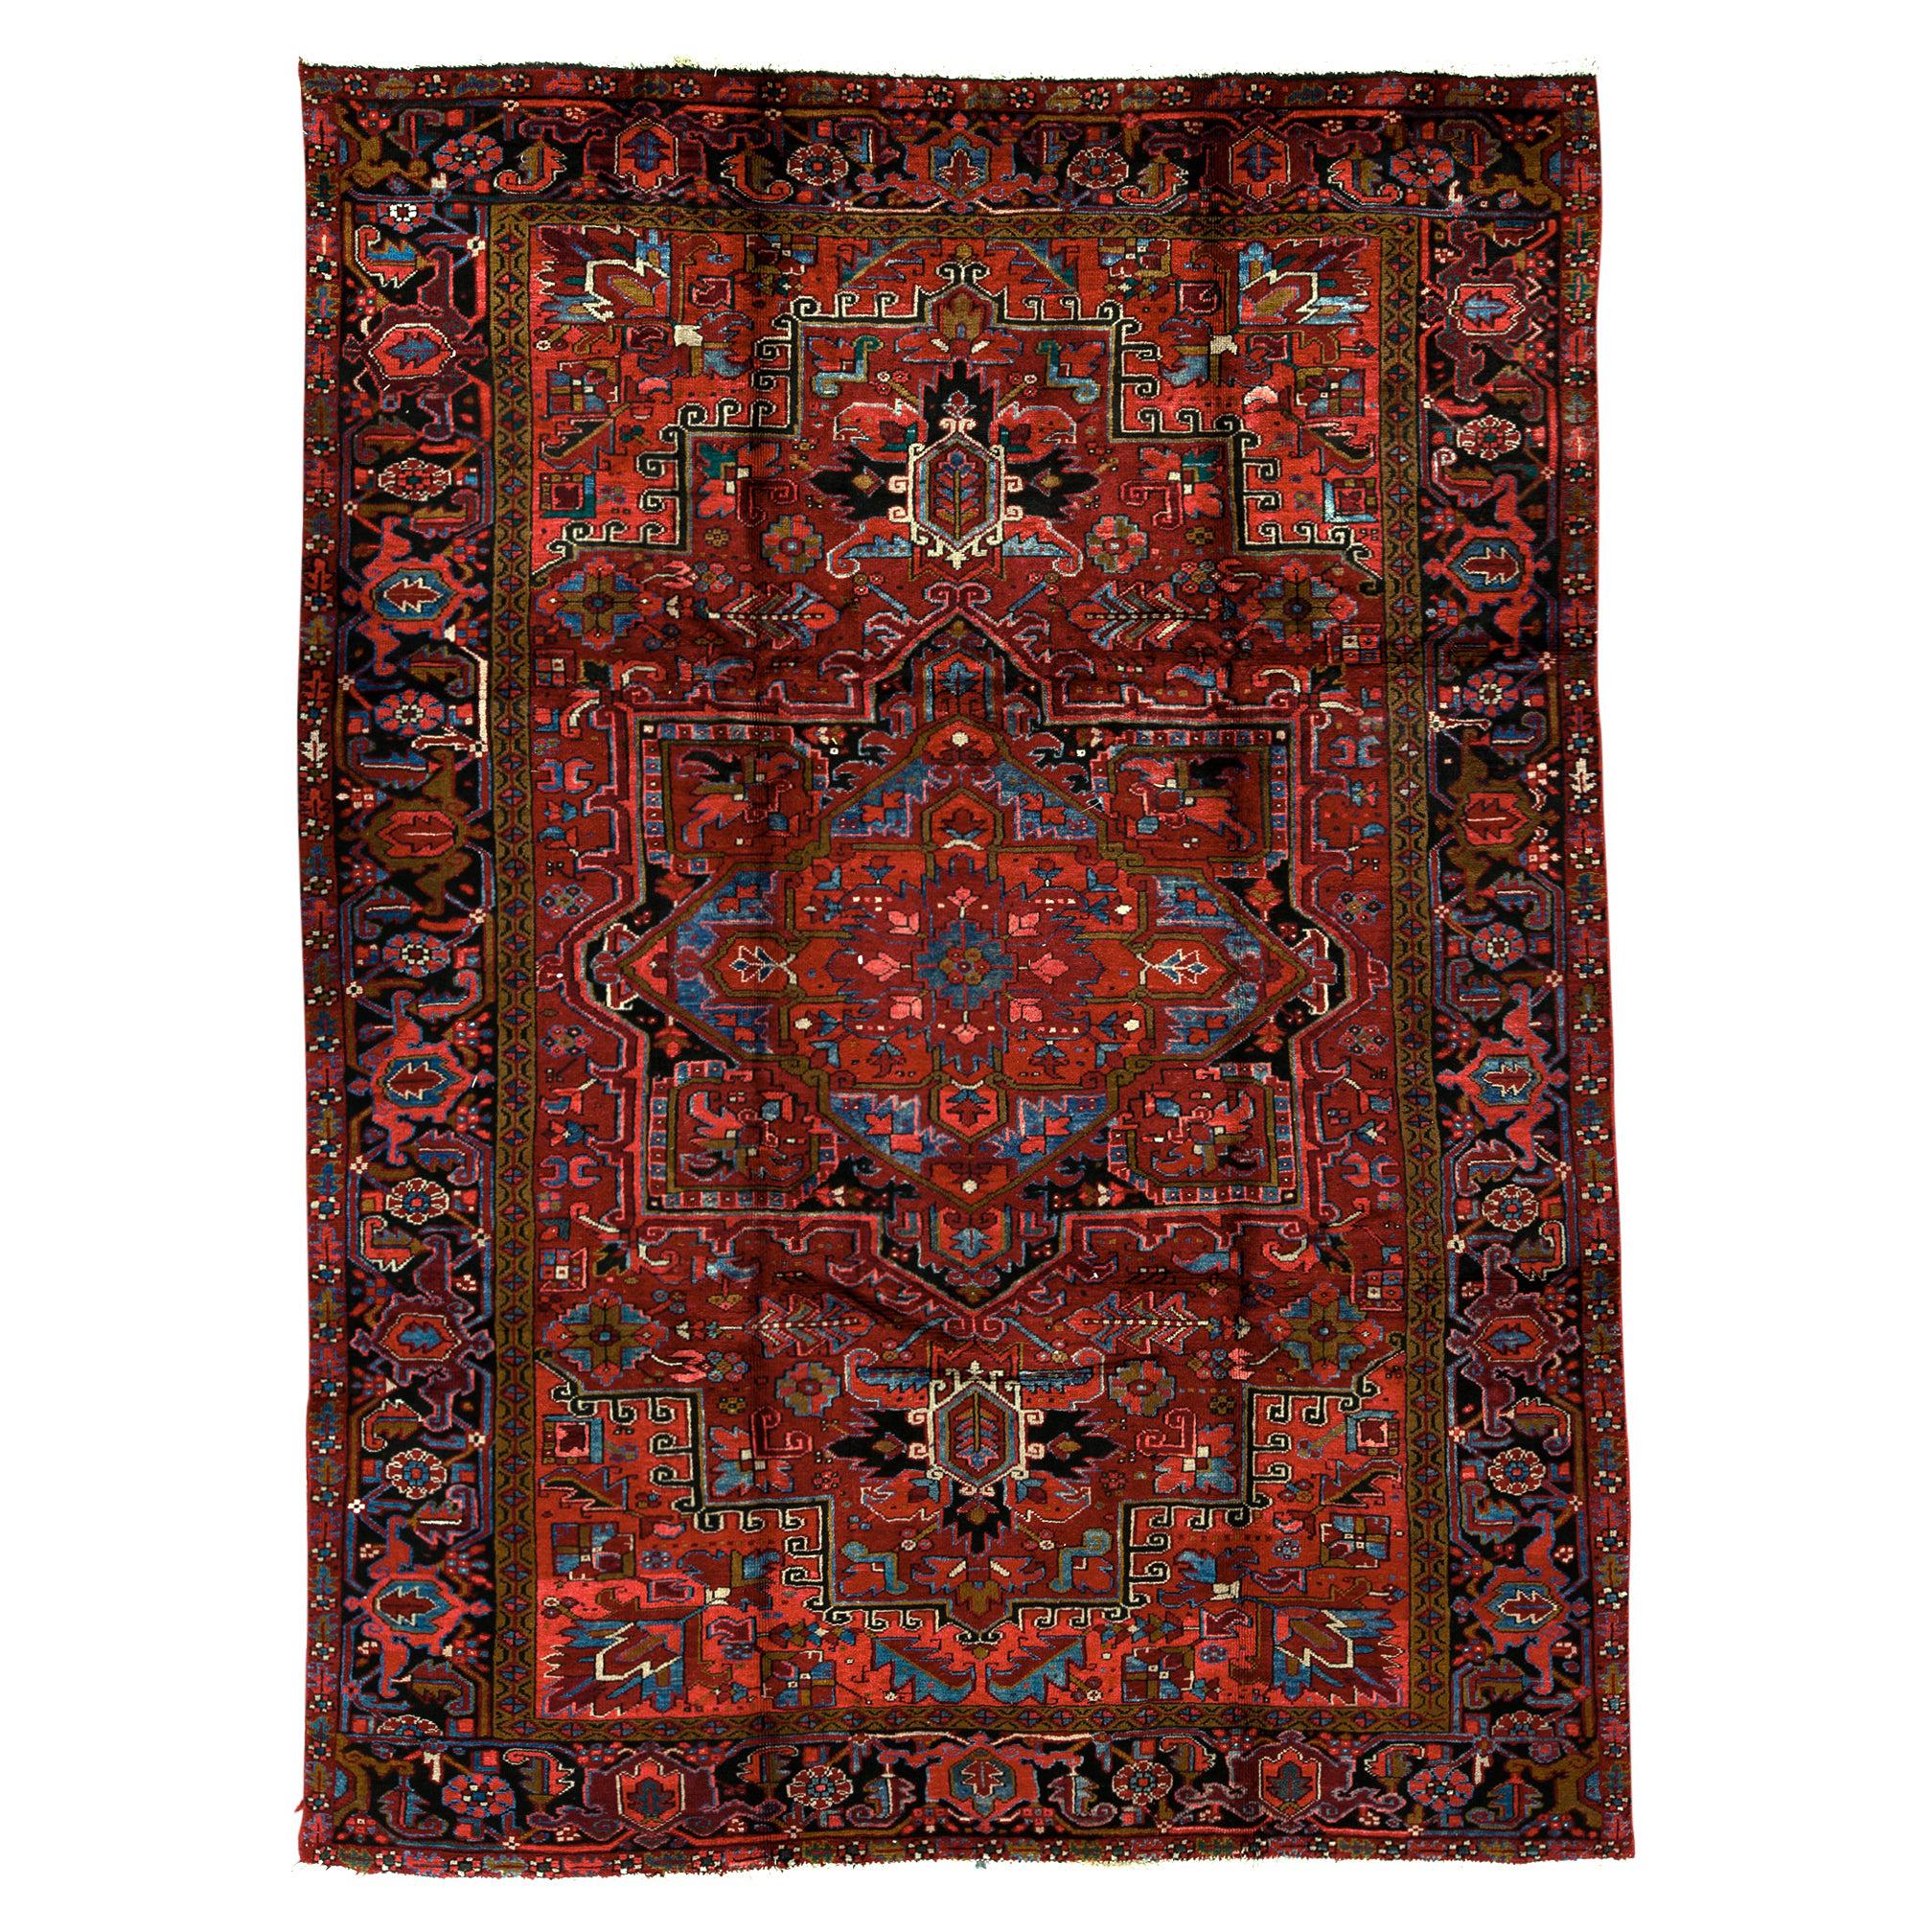   Antique Persian Fine Traditional Handwoven Luxury Wool Red / Black Rug